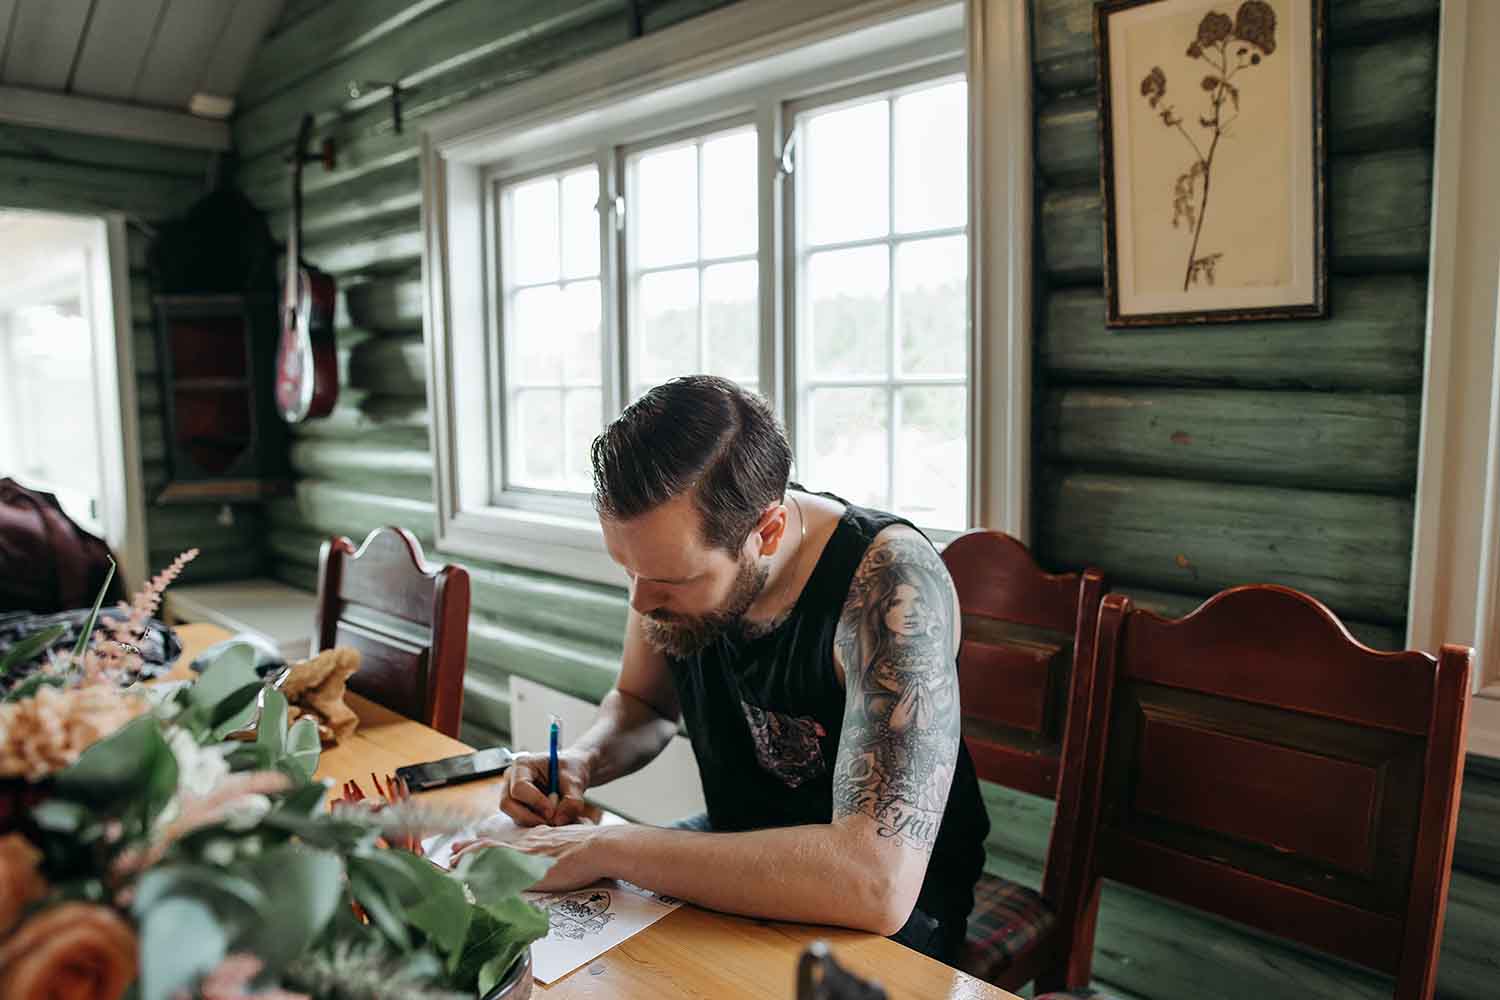 man with tattoos drawing cartoons on wooden table in living room with plants around and window behind